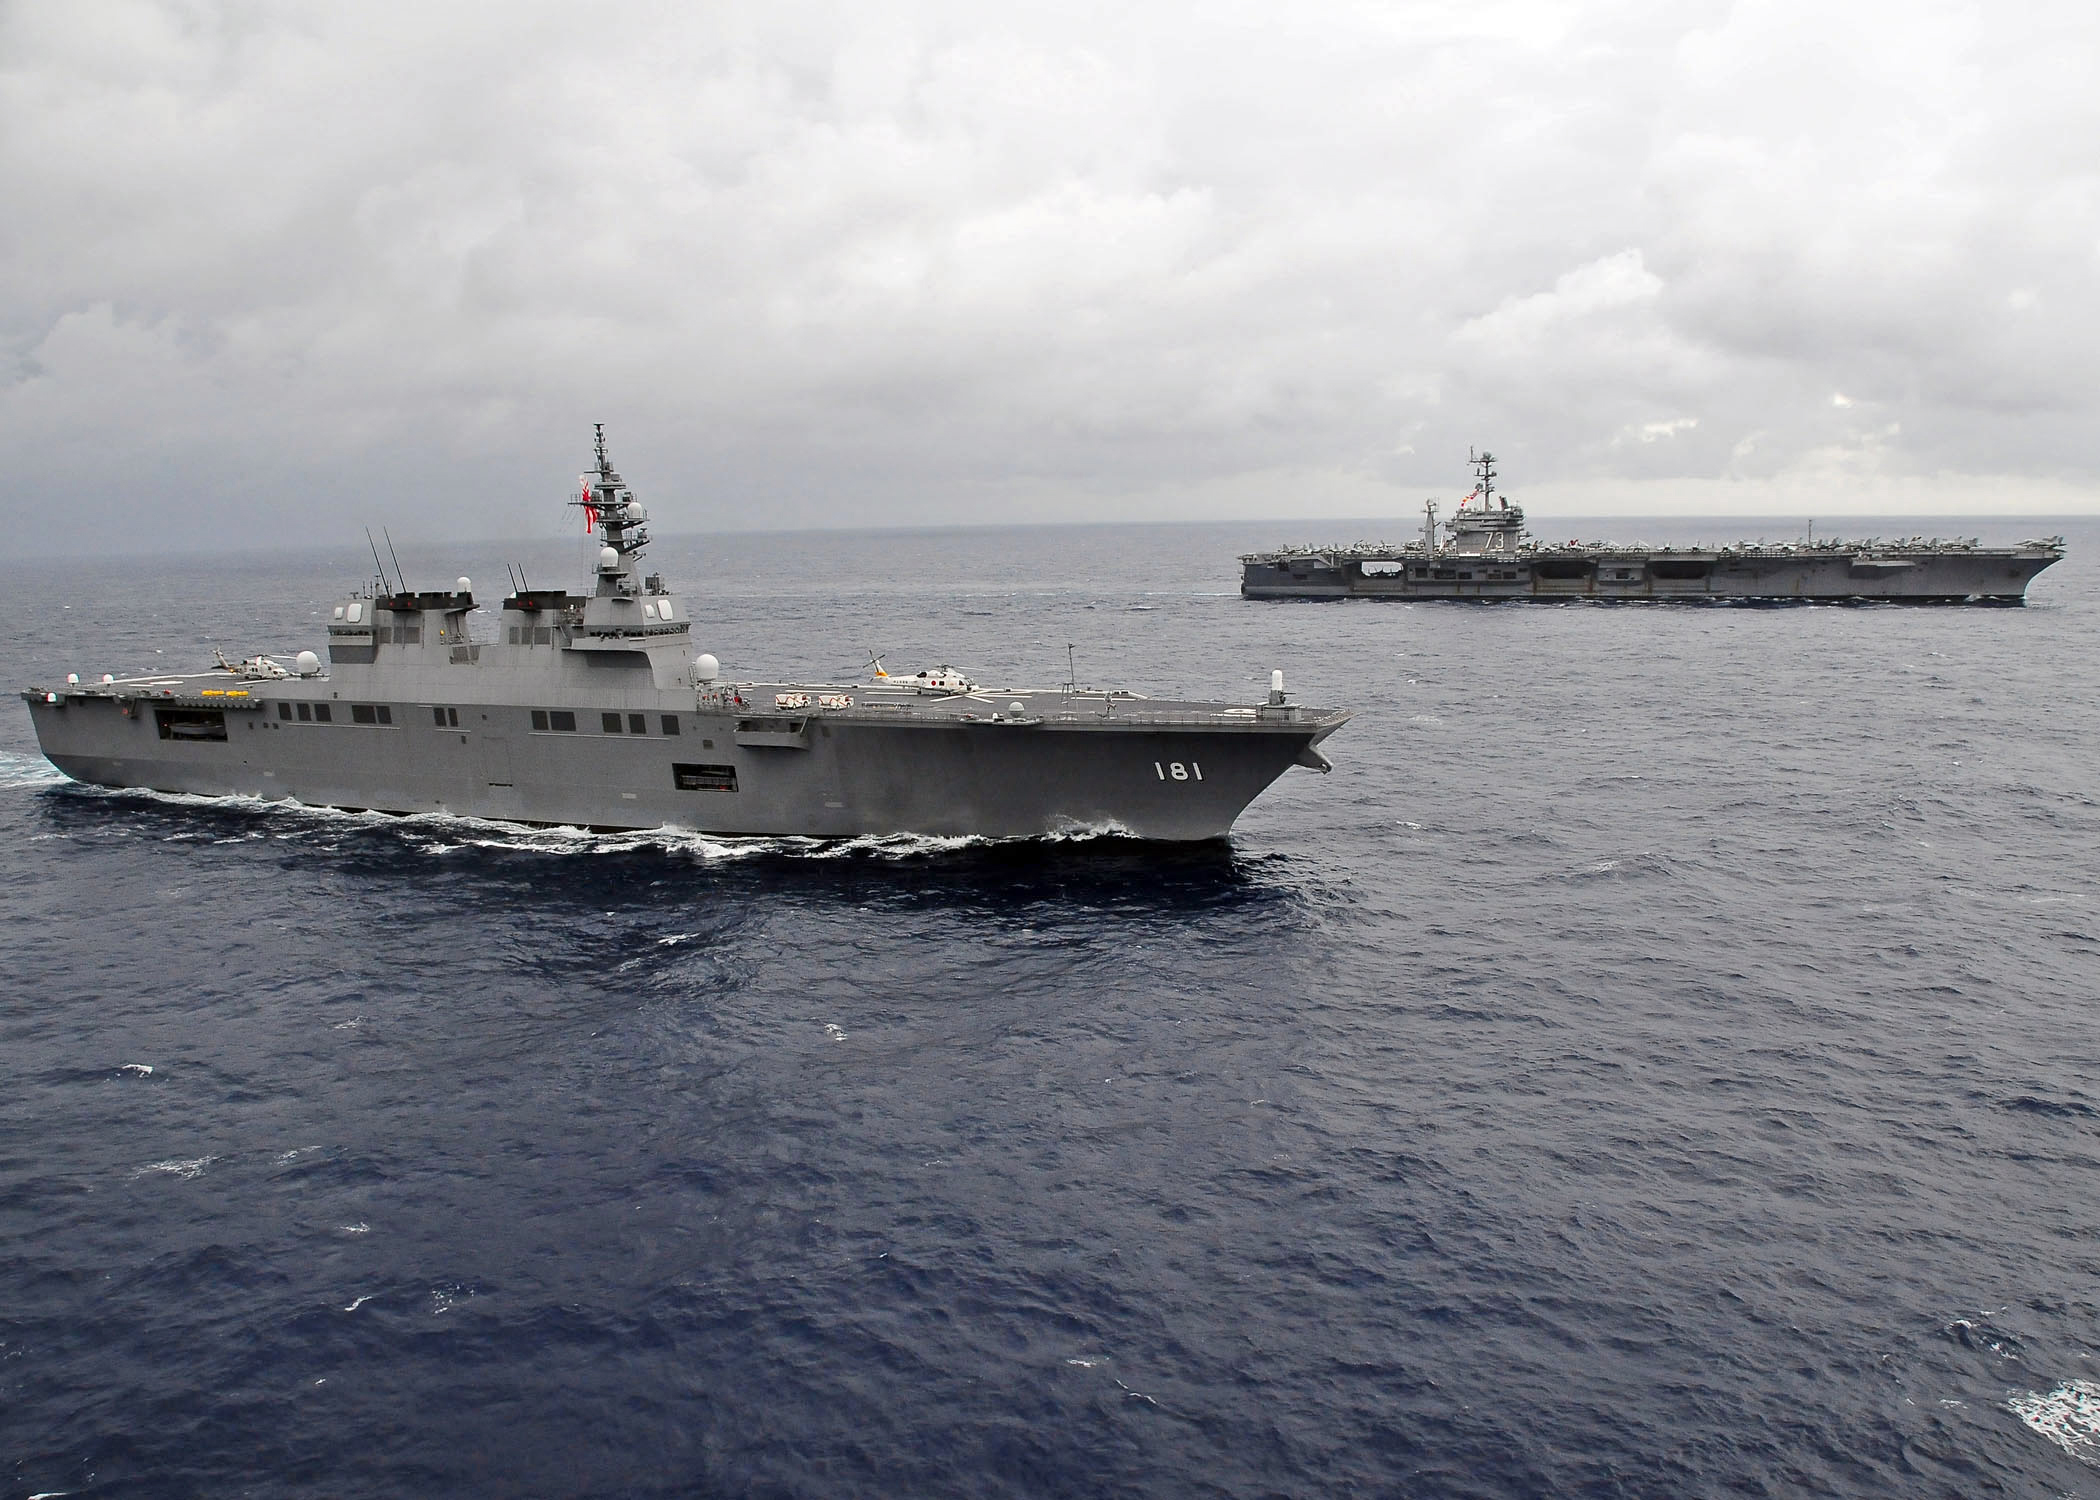 US_Navy_091117-N-1644H-087_The_Japan_Maritime_Self-Defense_Force_helicopter_destroyer_JS_Hyuga_%28DDH_181%29_is_underway_alongside_the_aircraft_carrier_USS_George_Washington_%28CVN_73%29.jpg